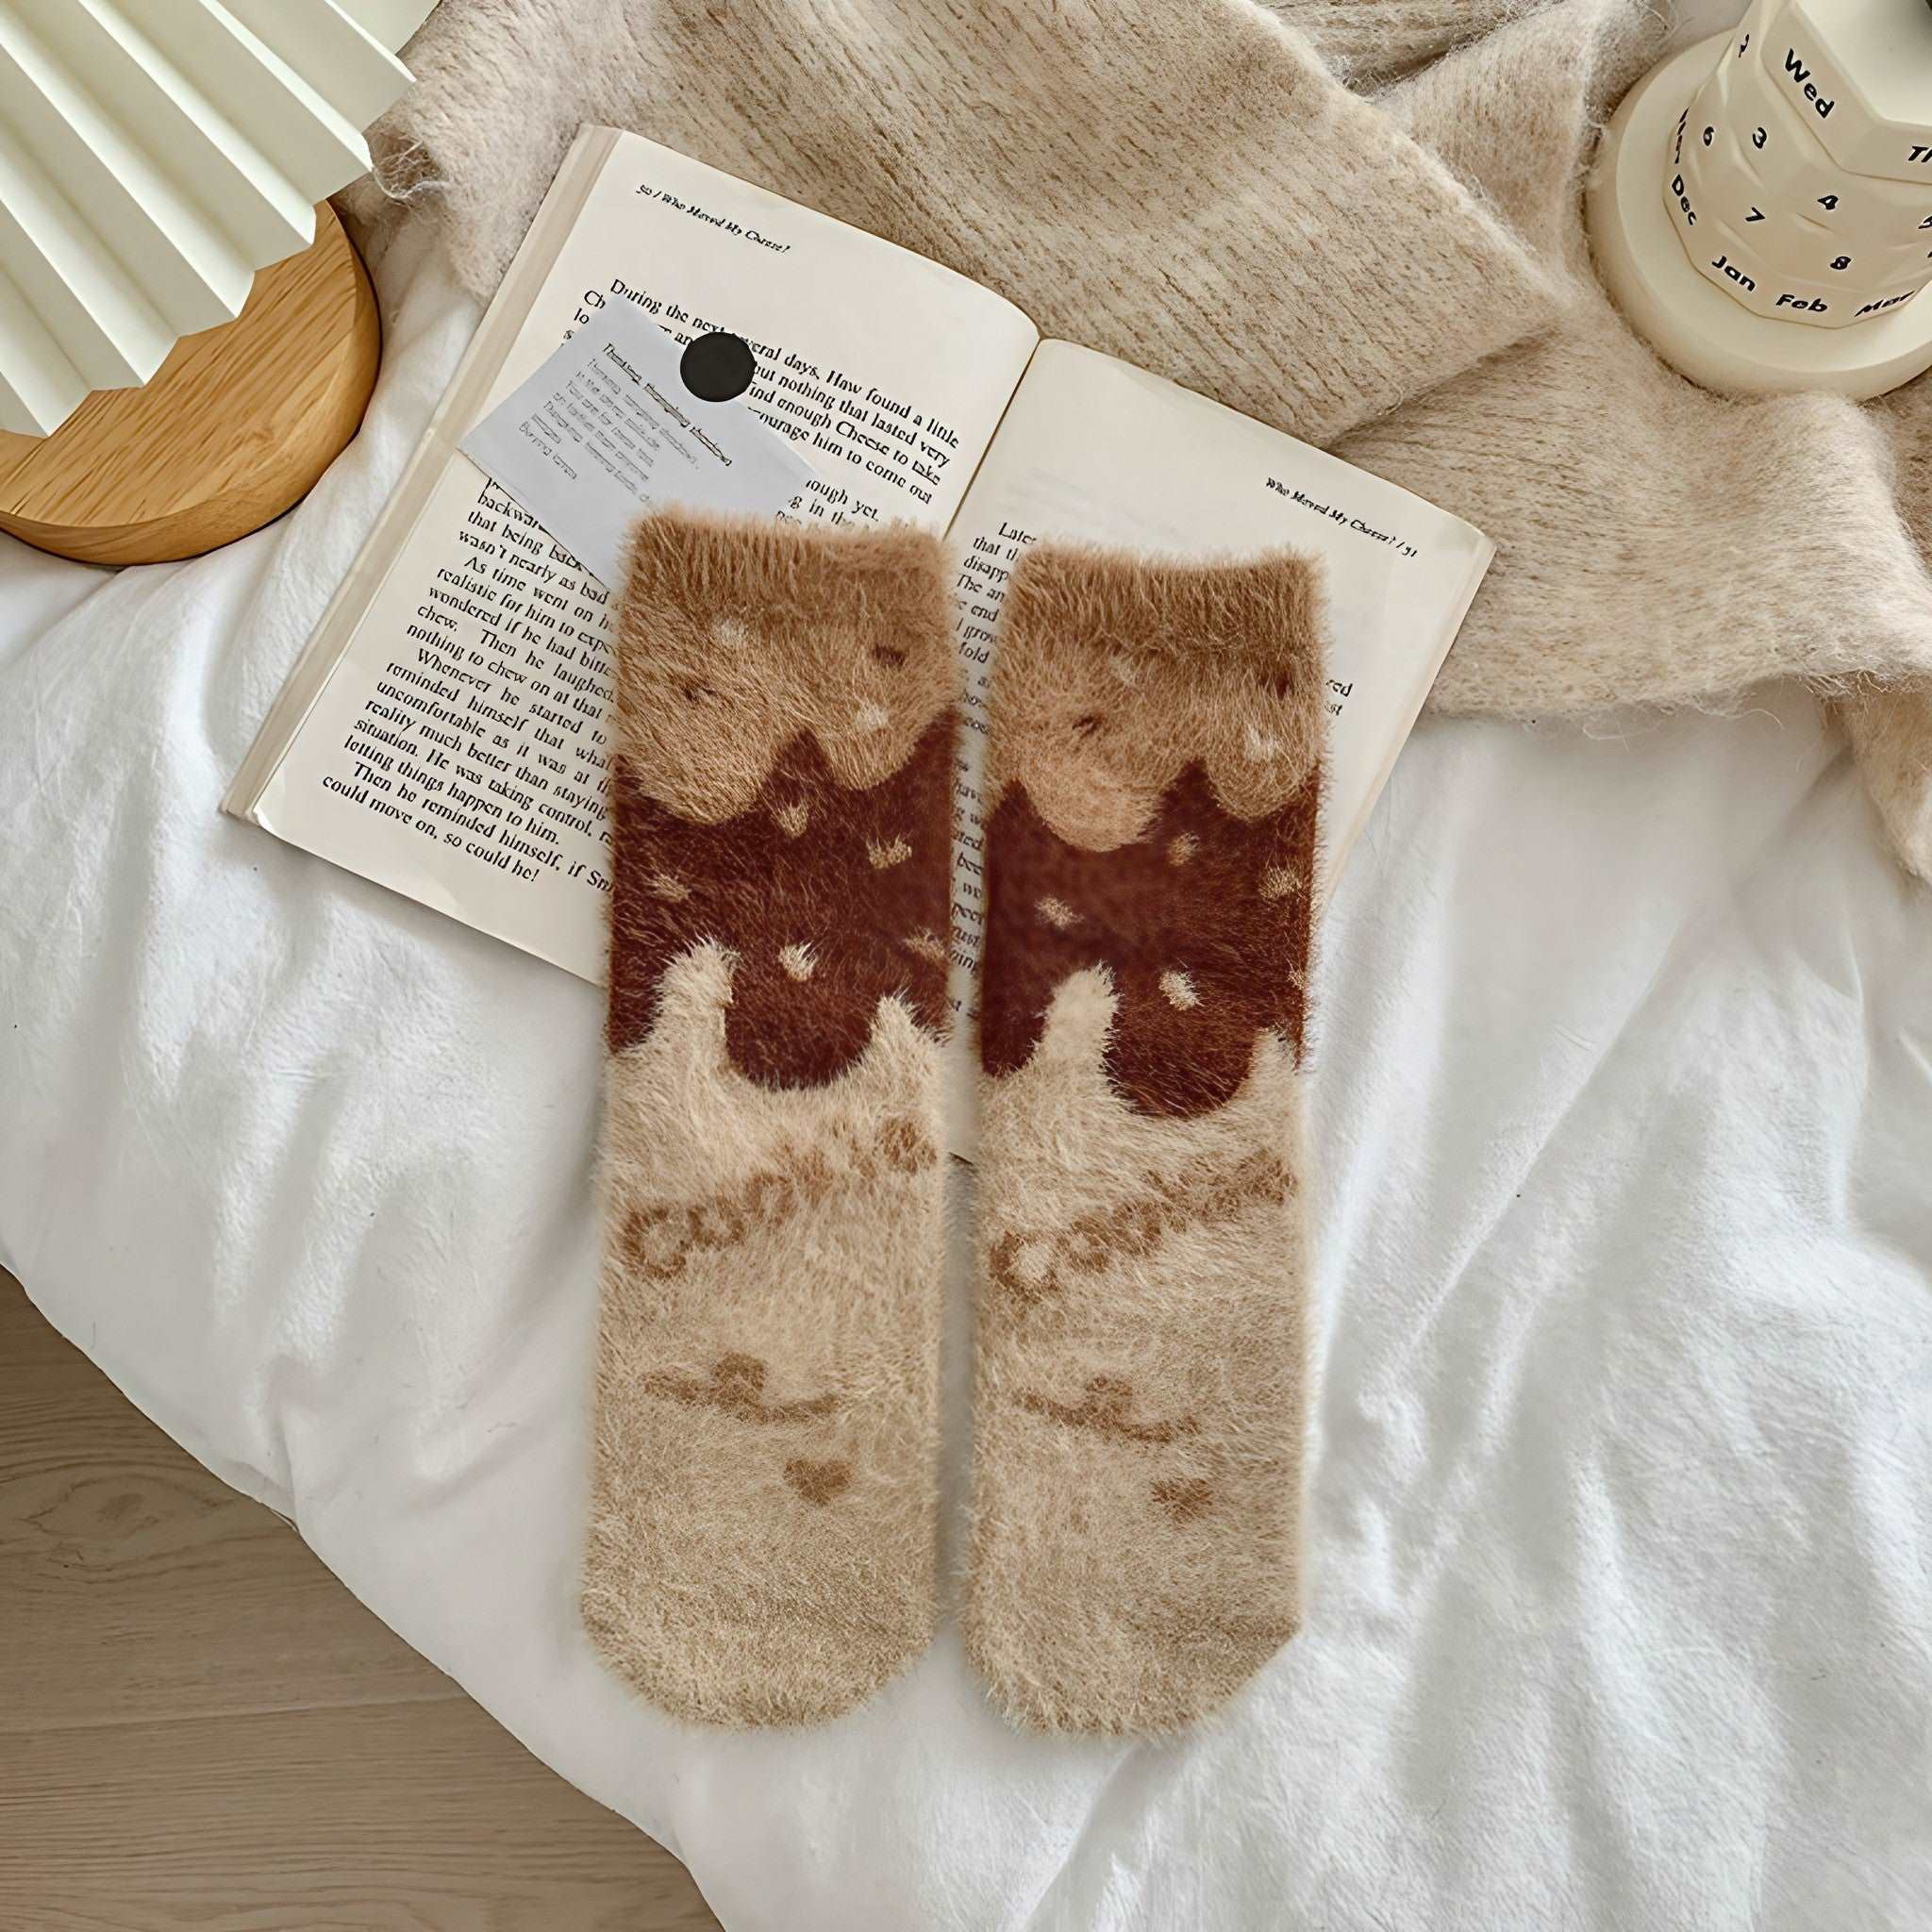 A relaxing scene with plush socks, a good read, and a hot beverage